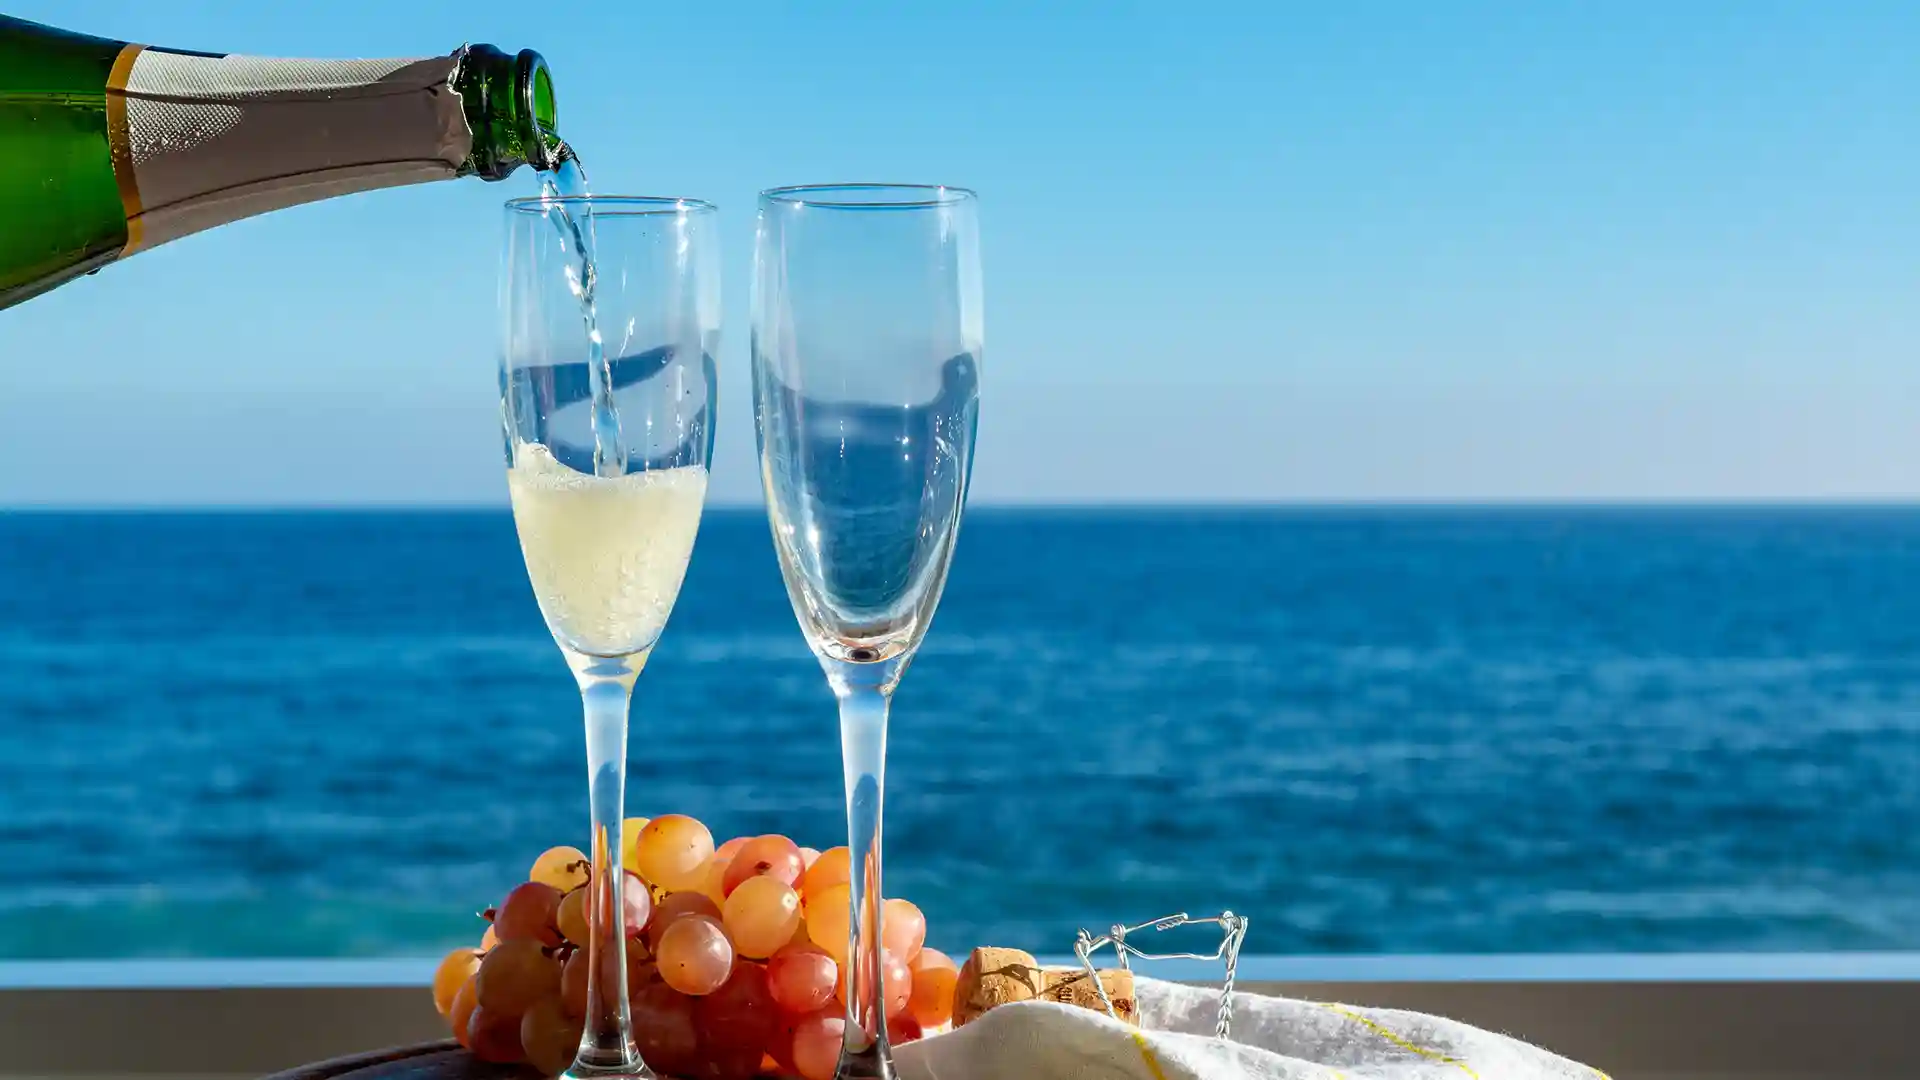 View of champagne being poured into glasses next to grapes on table with ocean in background.